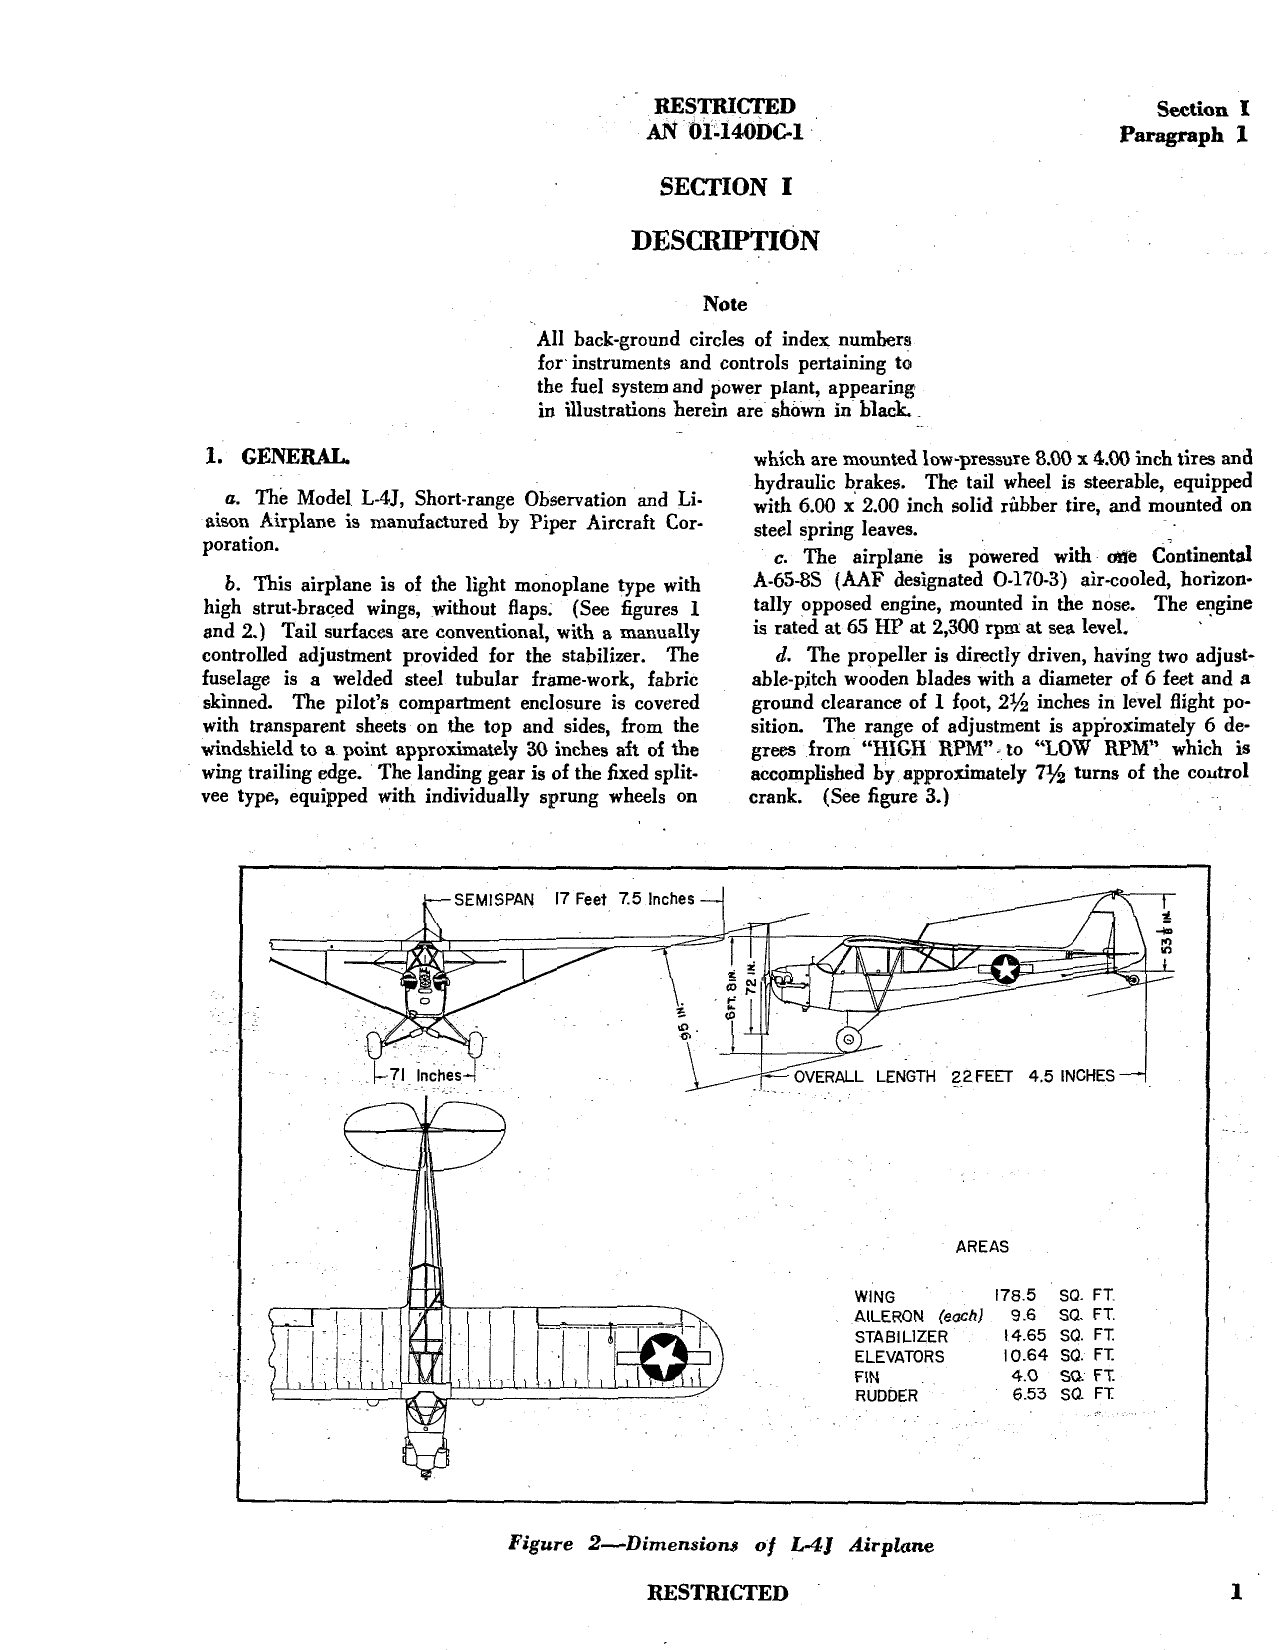 Sample page 5 from AirCorps Library document: Pilot's Flight Operating Instructions for Army Model L-4J